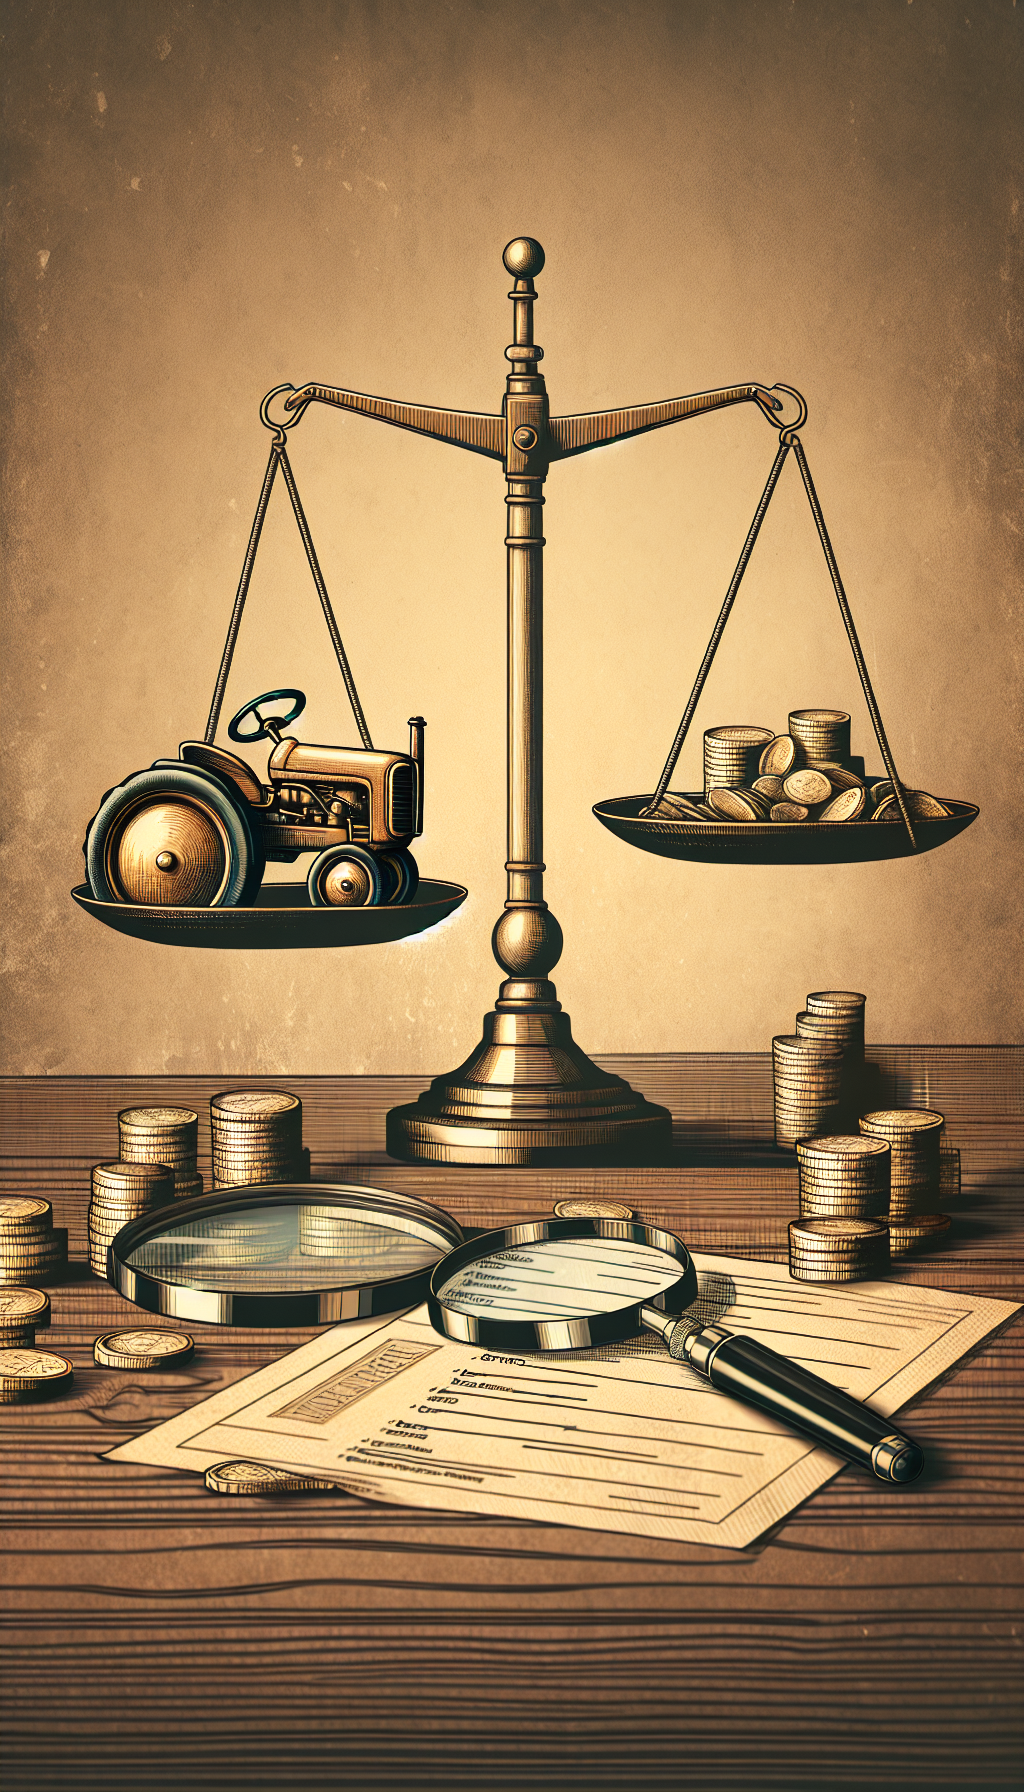 An antique pedal tractor is featured as the centerpiece on an appraiser's balance scale, teetering over a pile of gold coins and a magnifying glass examining a checklist on the other side. Subtle textures suggest a sepia-tinted, vintage ambiance, while line art overlays illustrate key factors like rarity and condition, weighing their significance in determining the tractor's value.